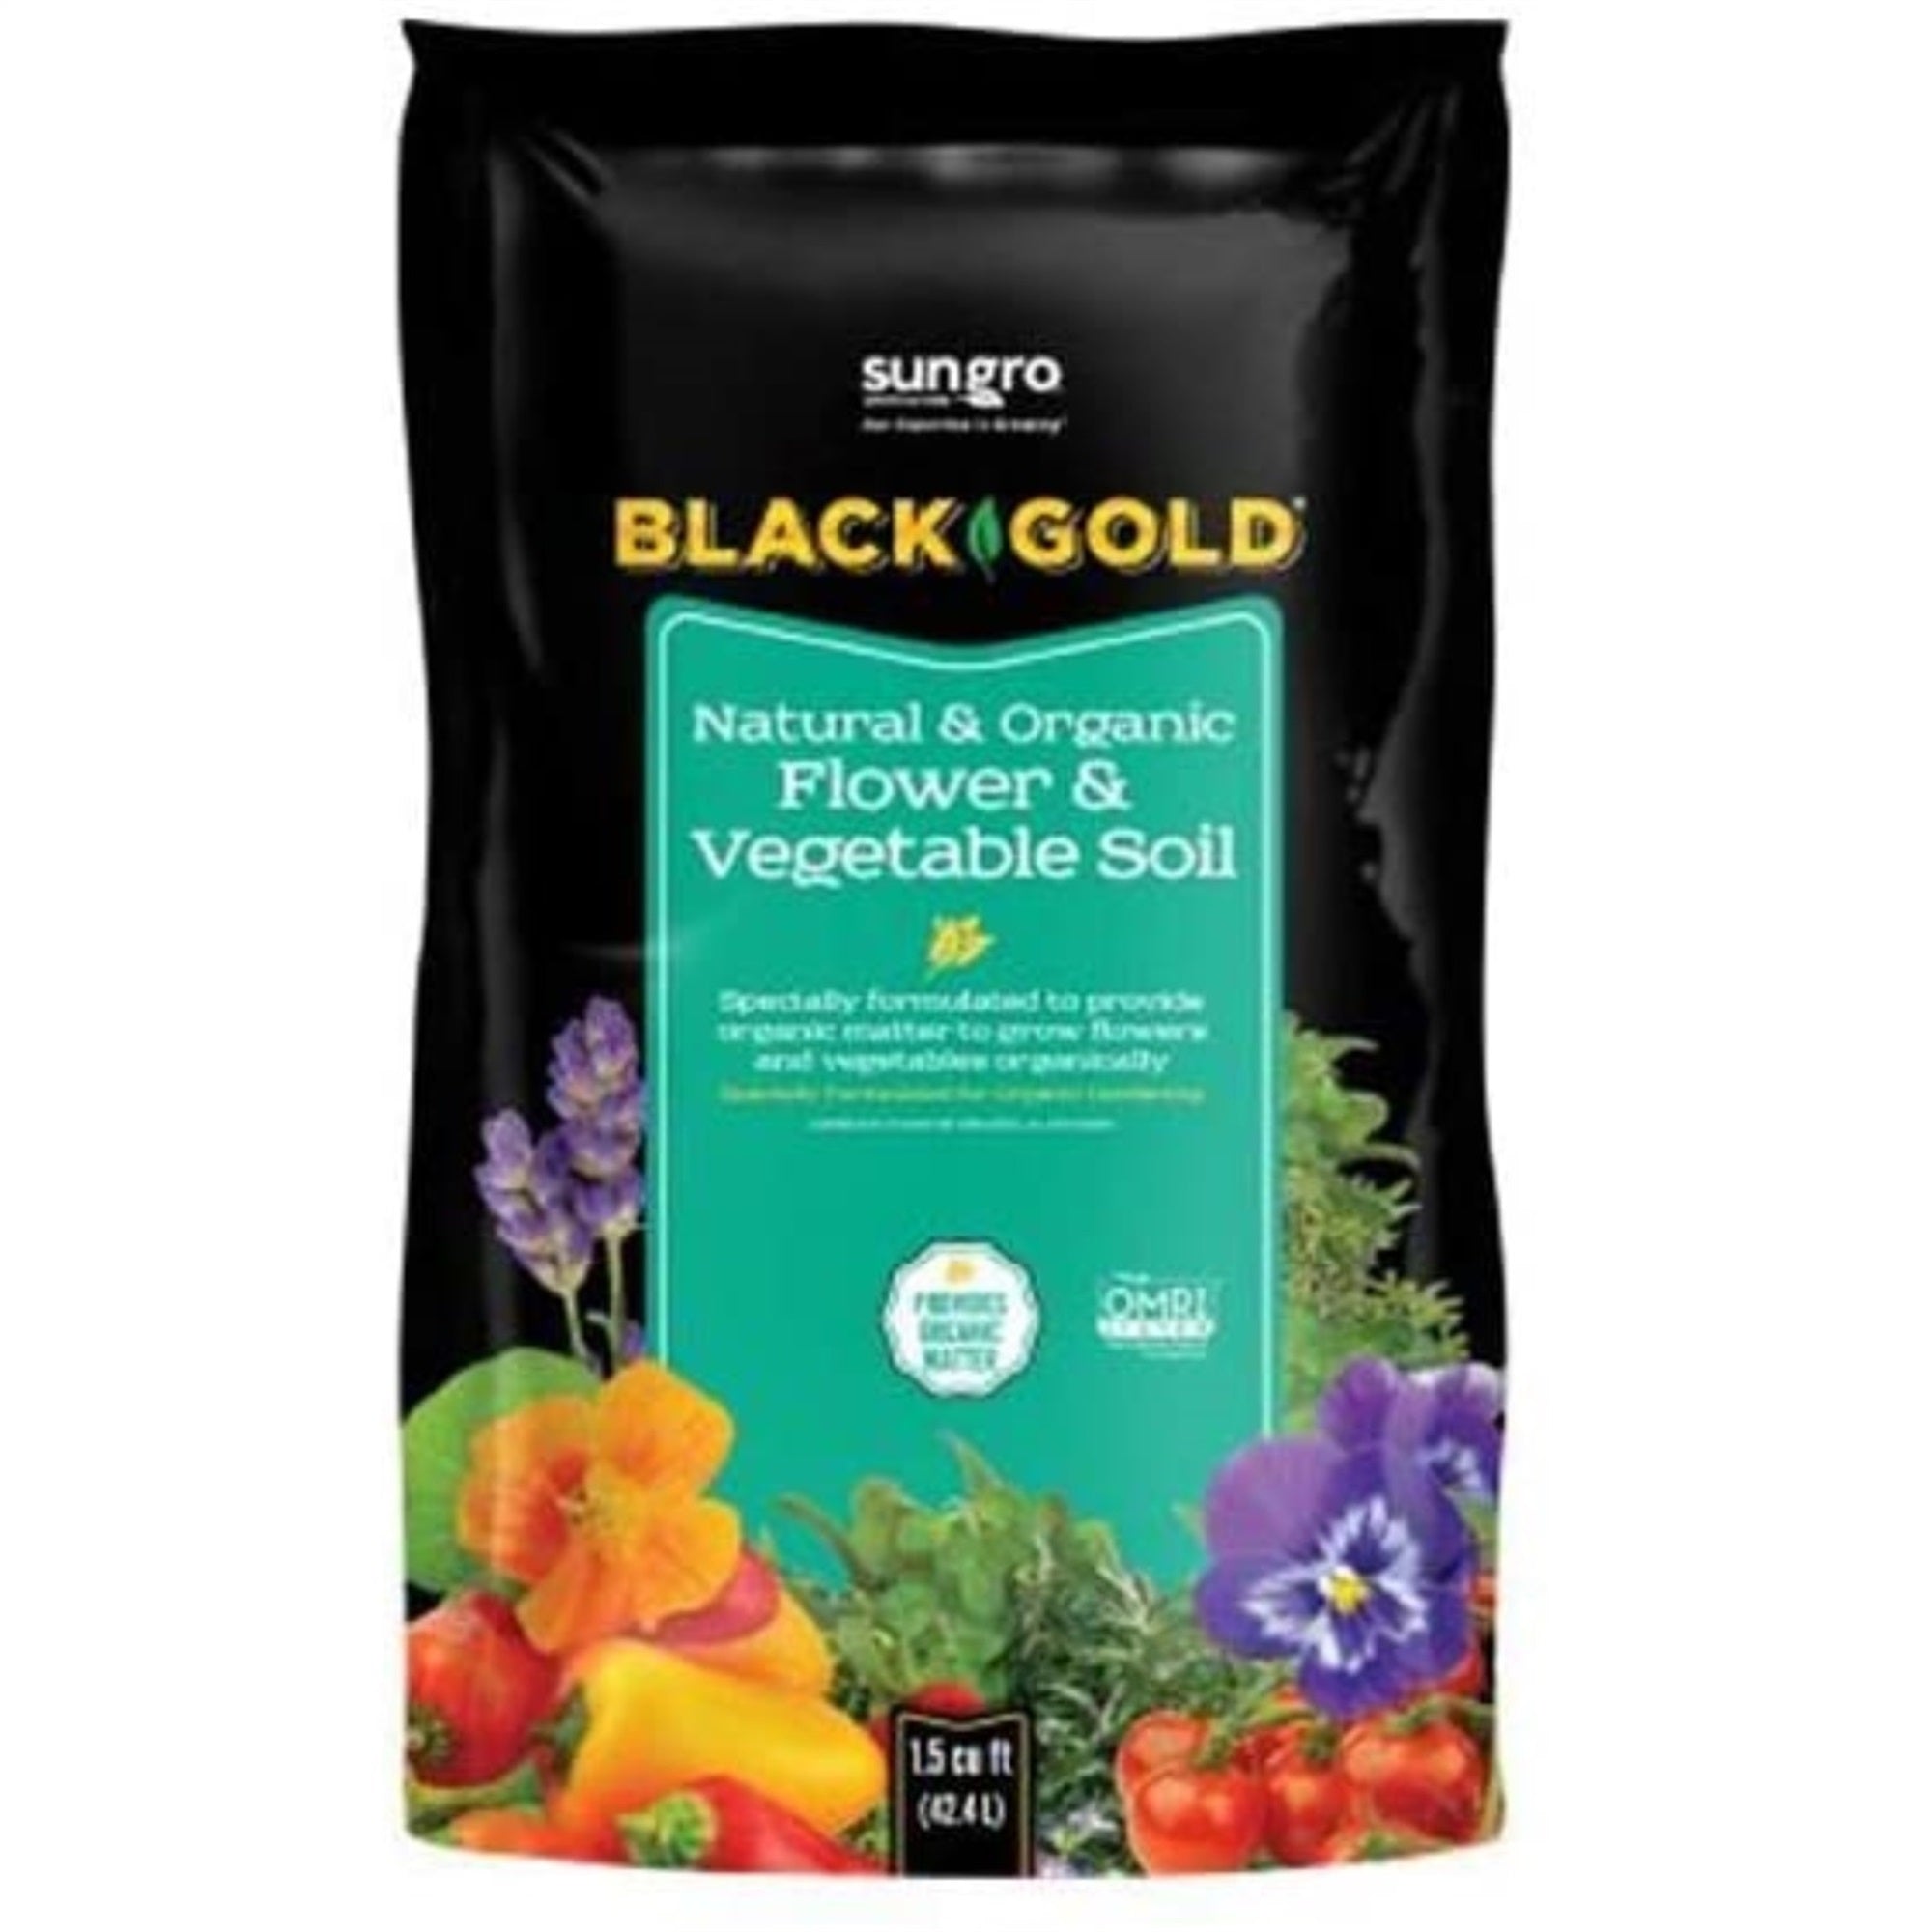 SunGro Black Gold Outdoor Natural and Organic Garden Flower and Vegetables Blend Potting Soil Mix for Outdoor Plants, 1.5 Cubic Foot Bag